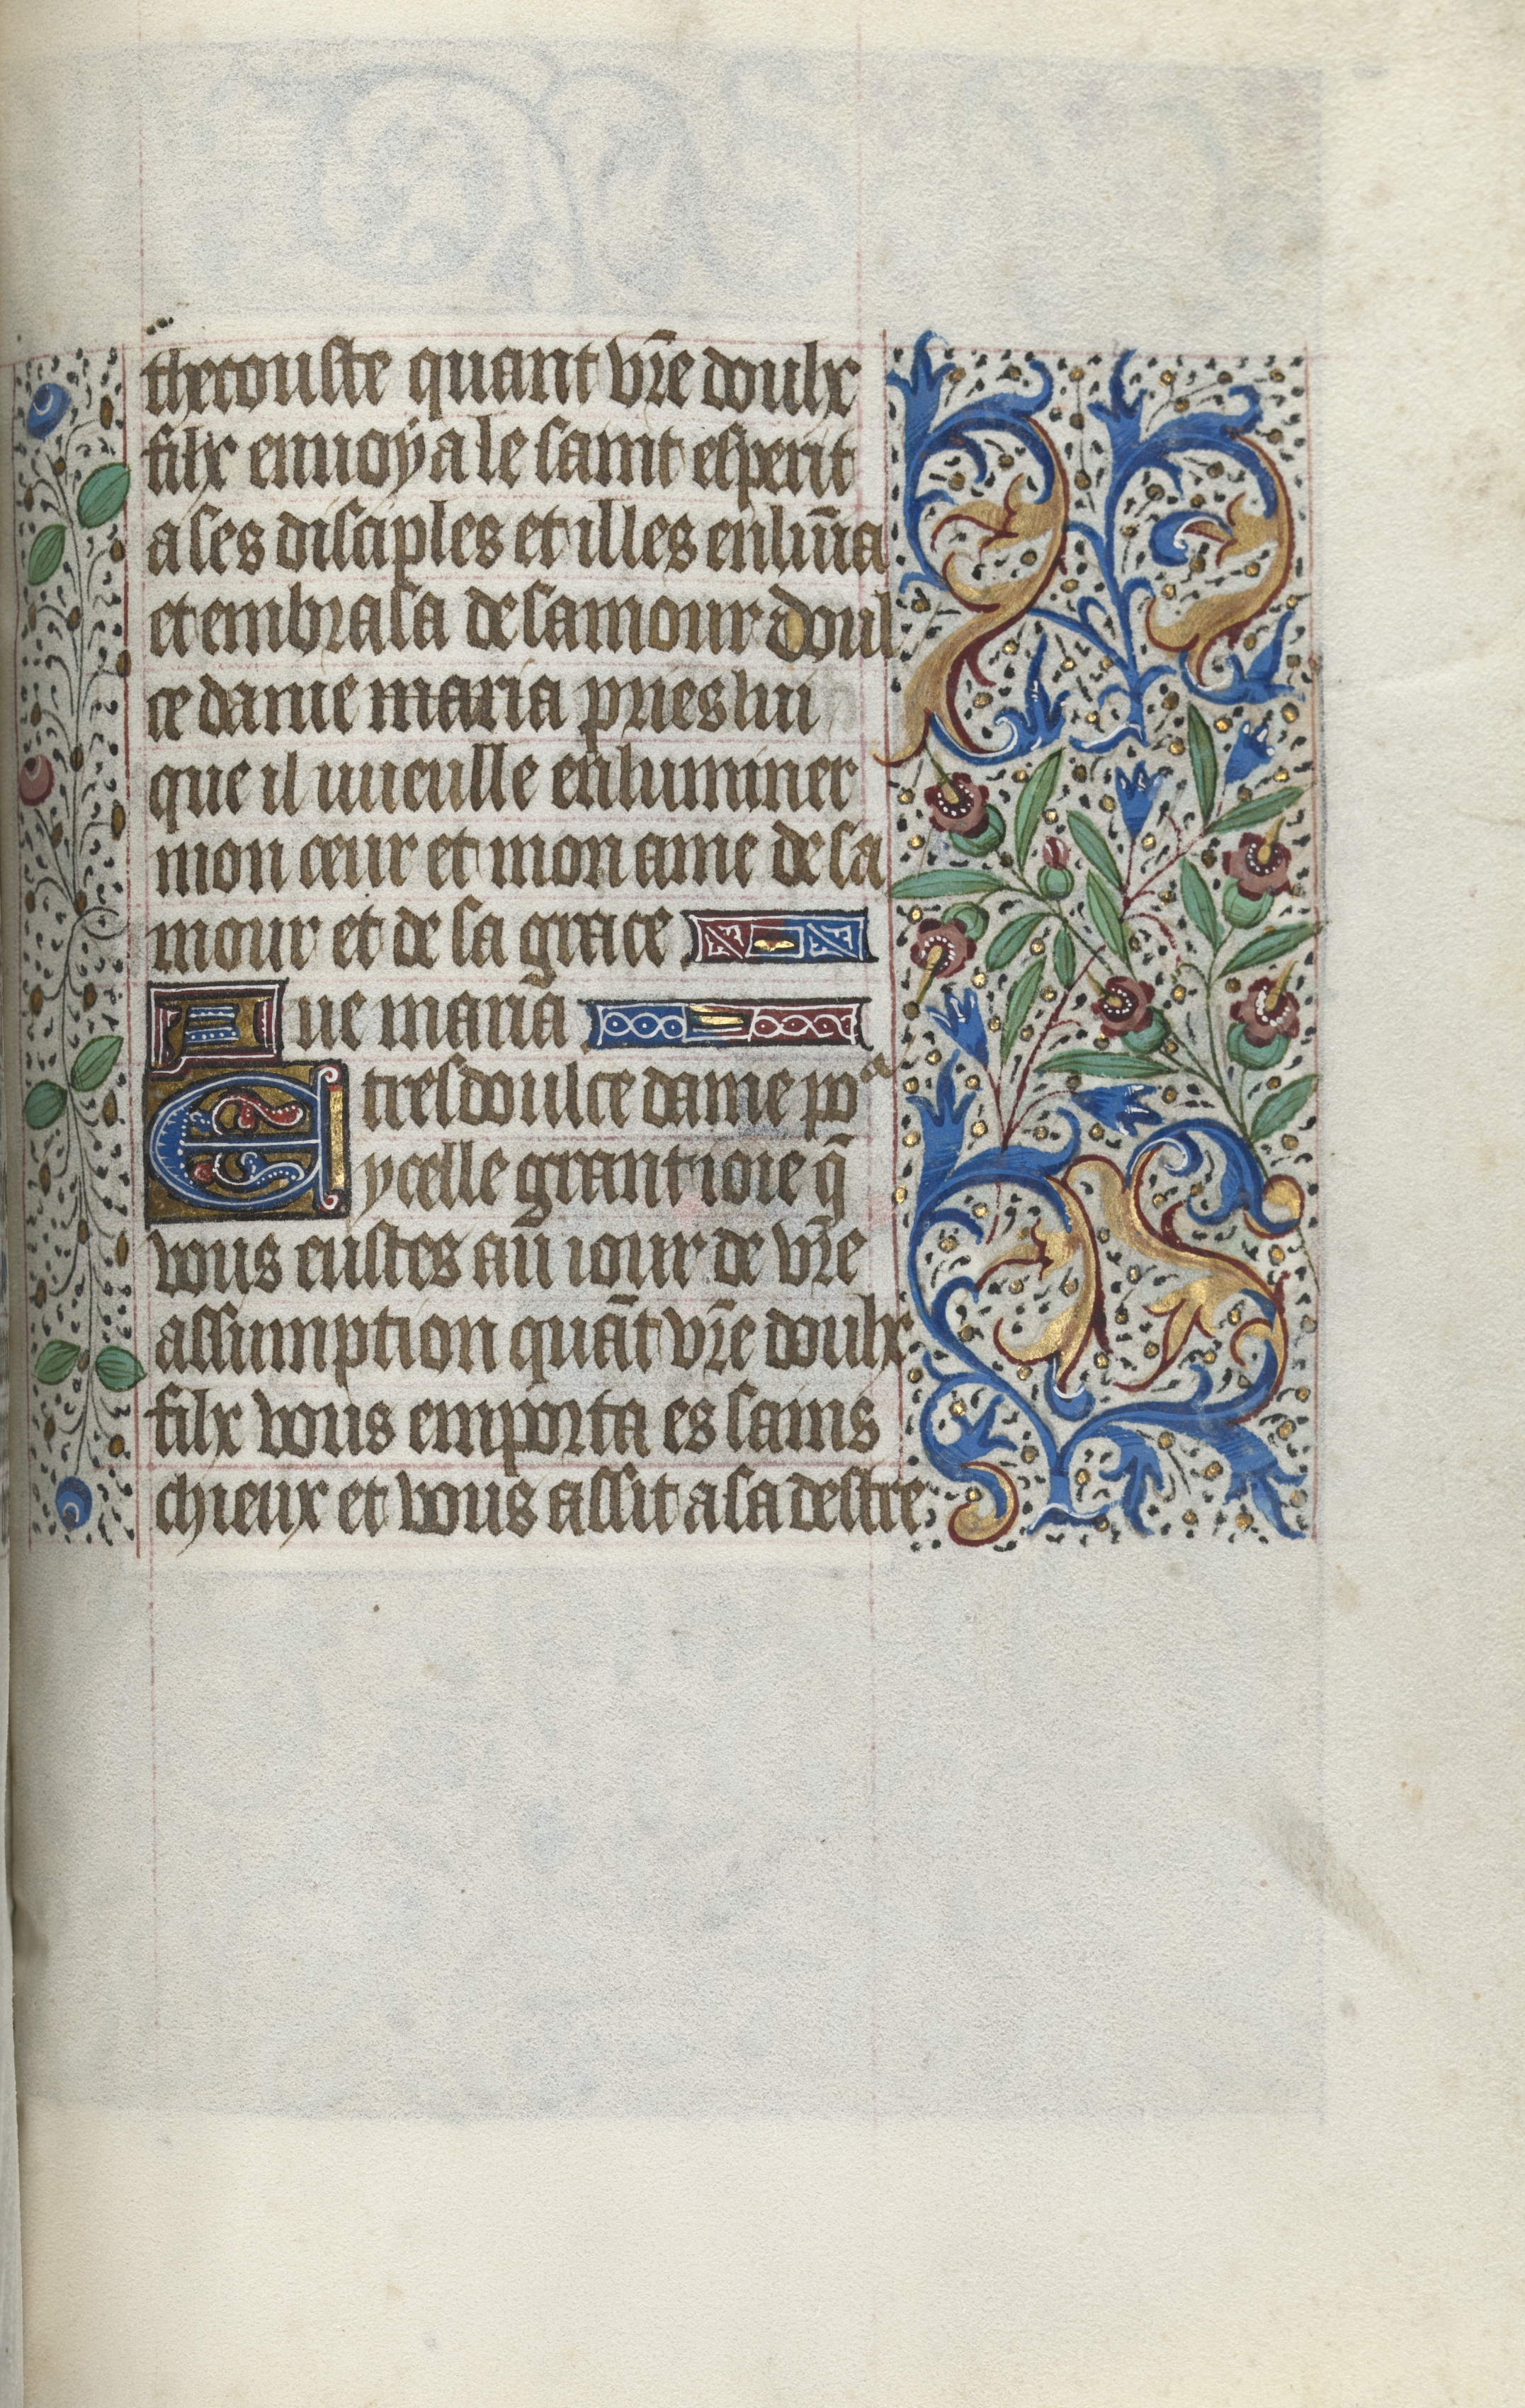 Book of Hours (Use of Rouen): fol. 151r